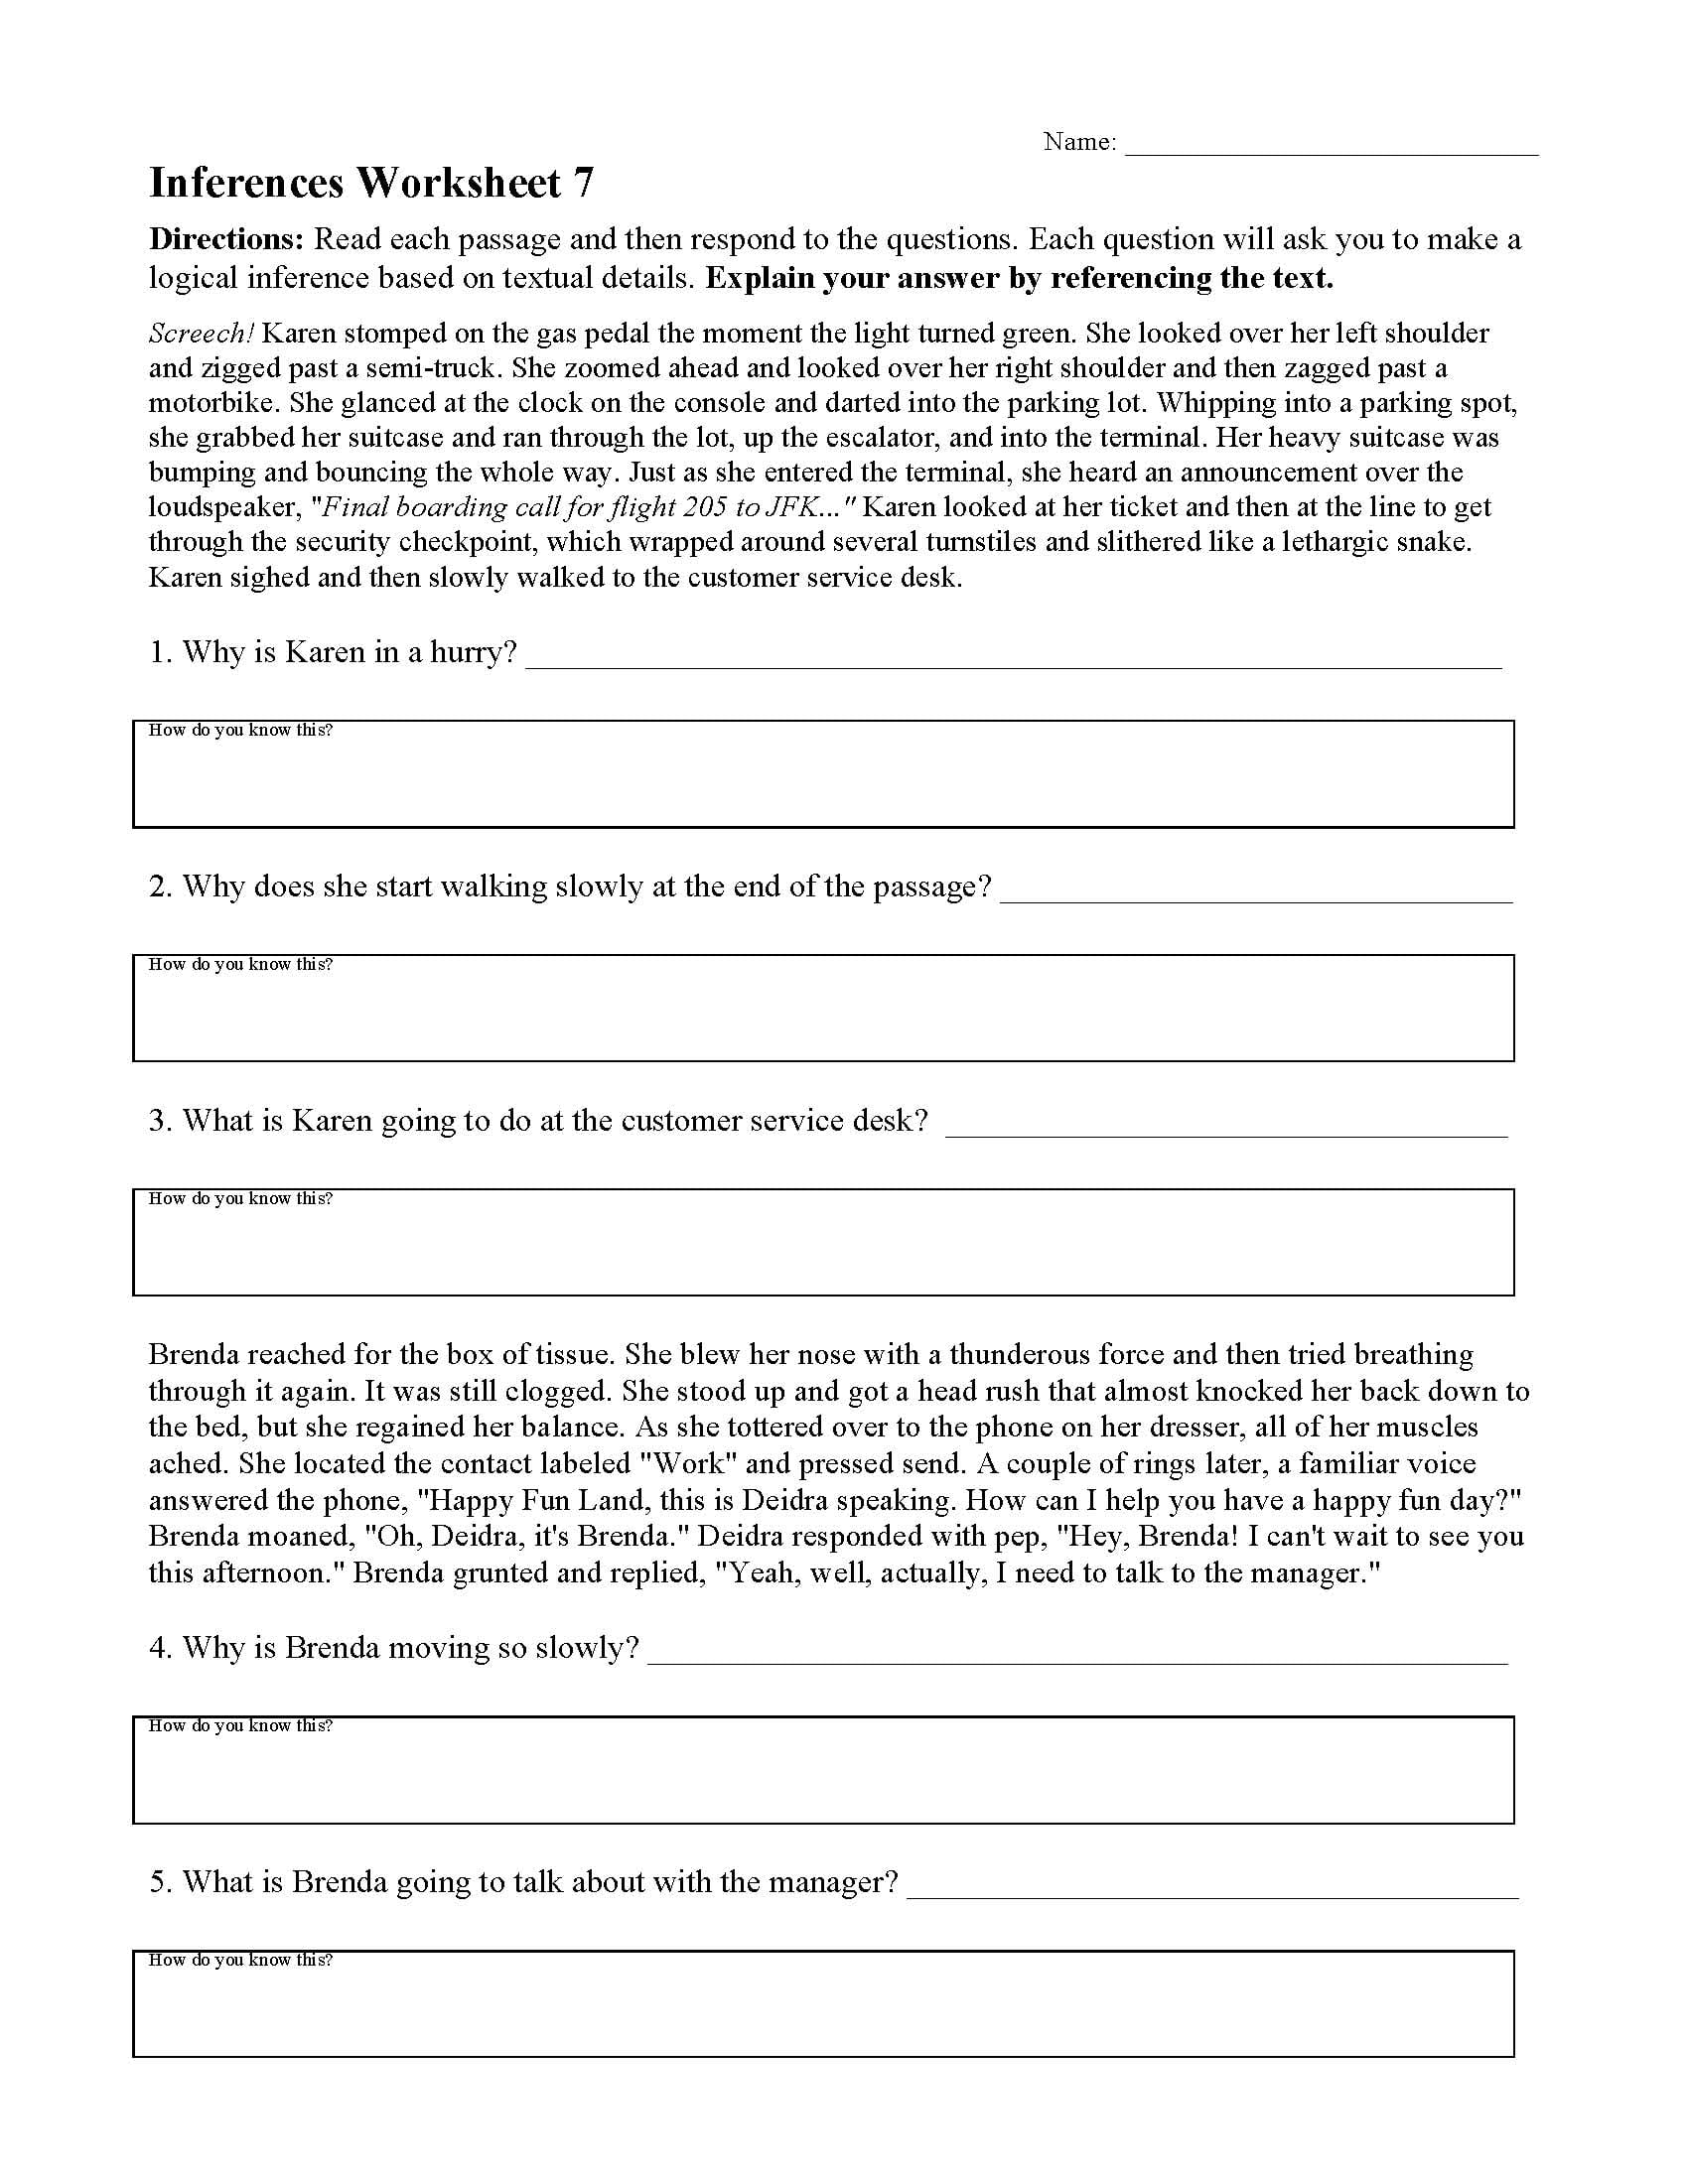 Free Printable Reading Inference Worksheets